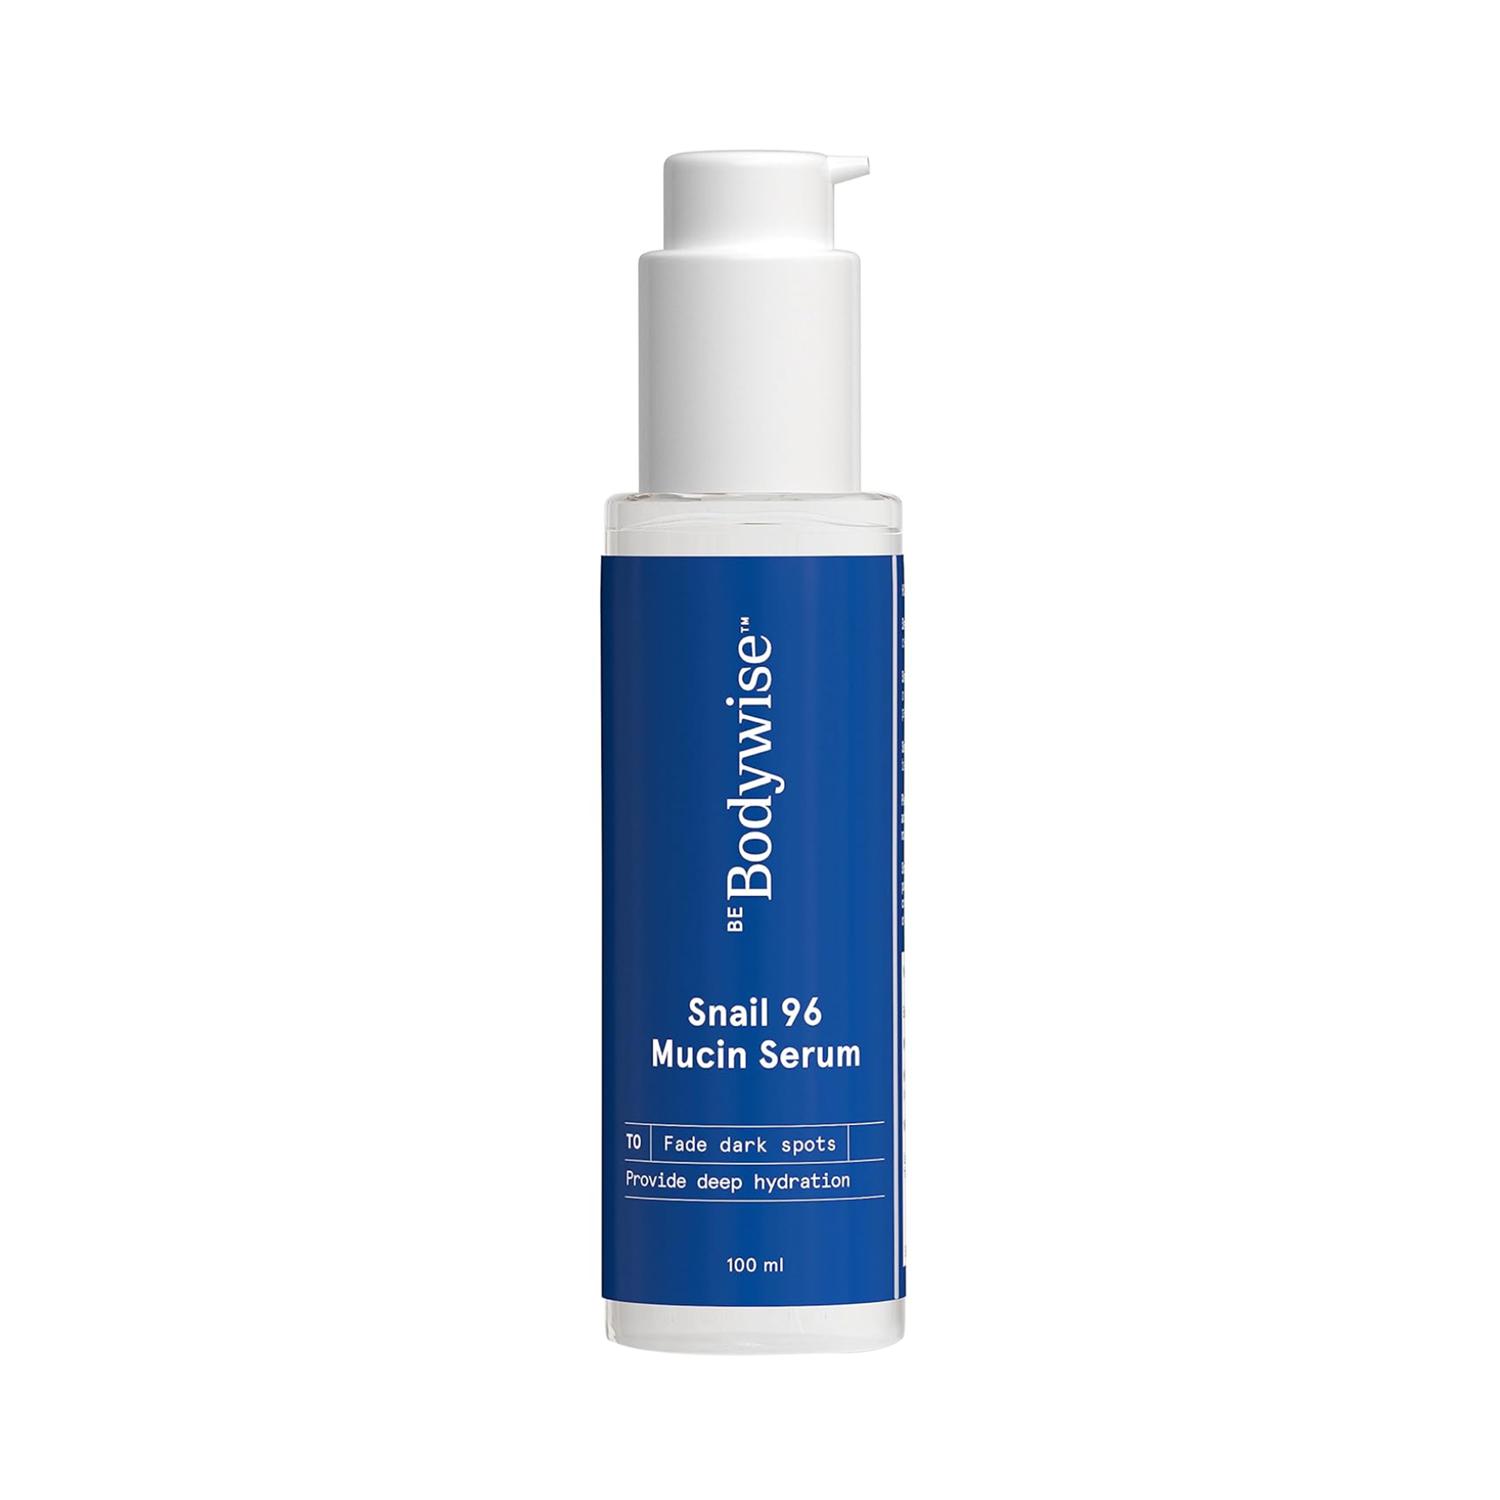 Be Bodywise | Be Bodywise Snail 96 Mucin Serum For Deep Hydration (100ml)